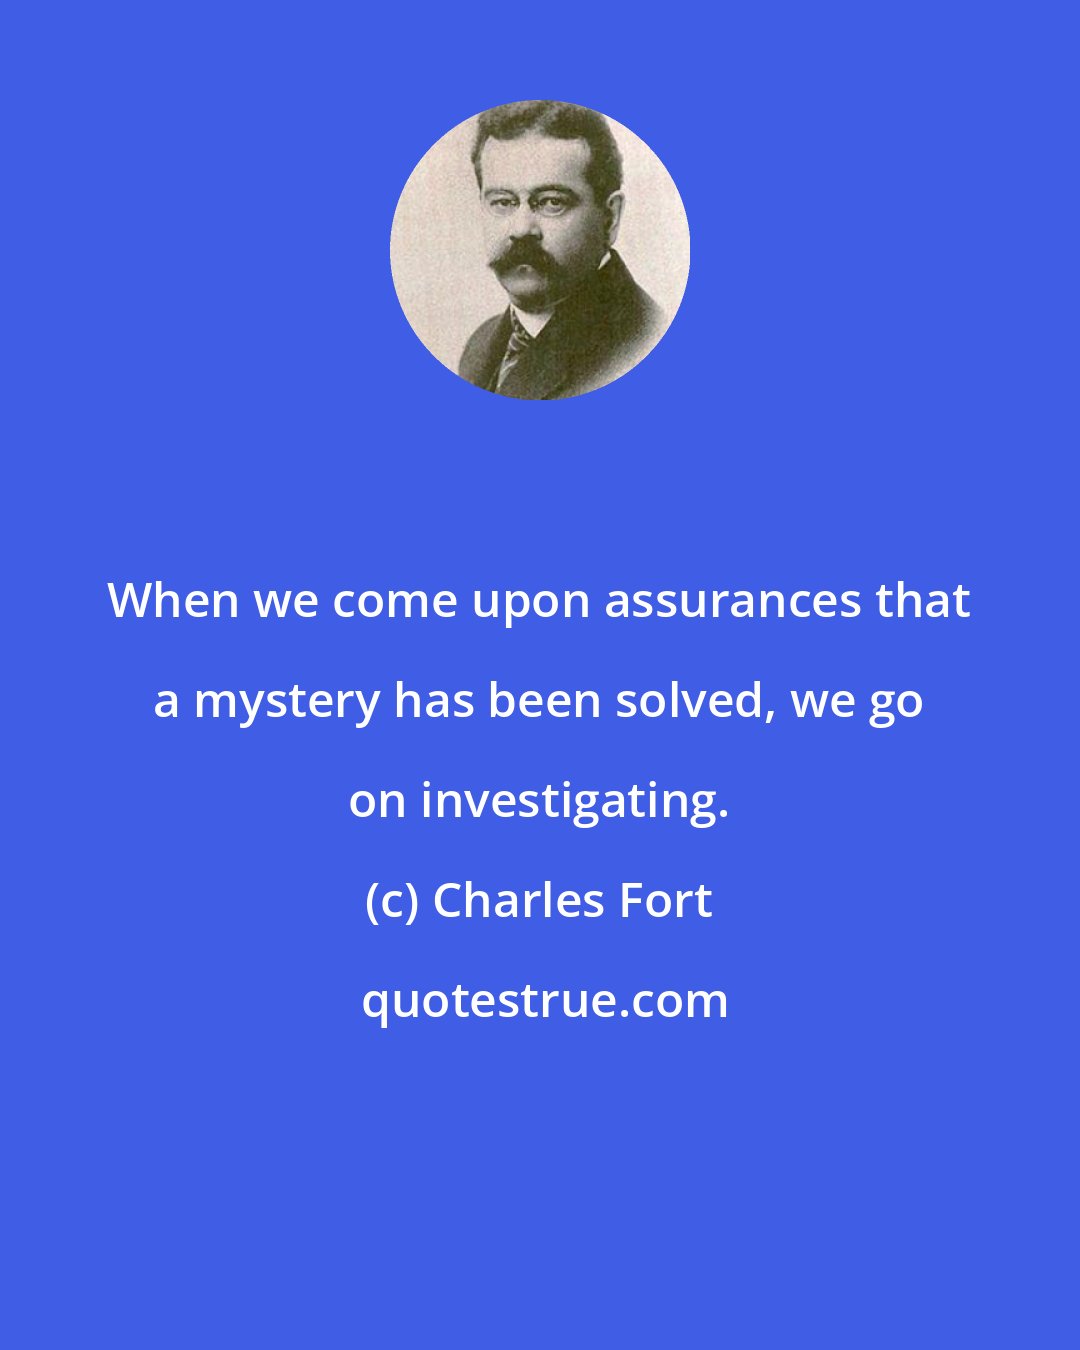 Charles Fort: When we come upon assurances that a mystery has been solved, we go on investigating.